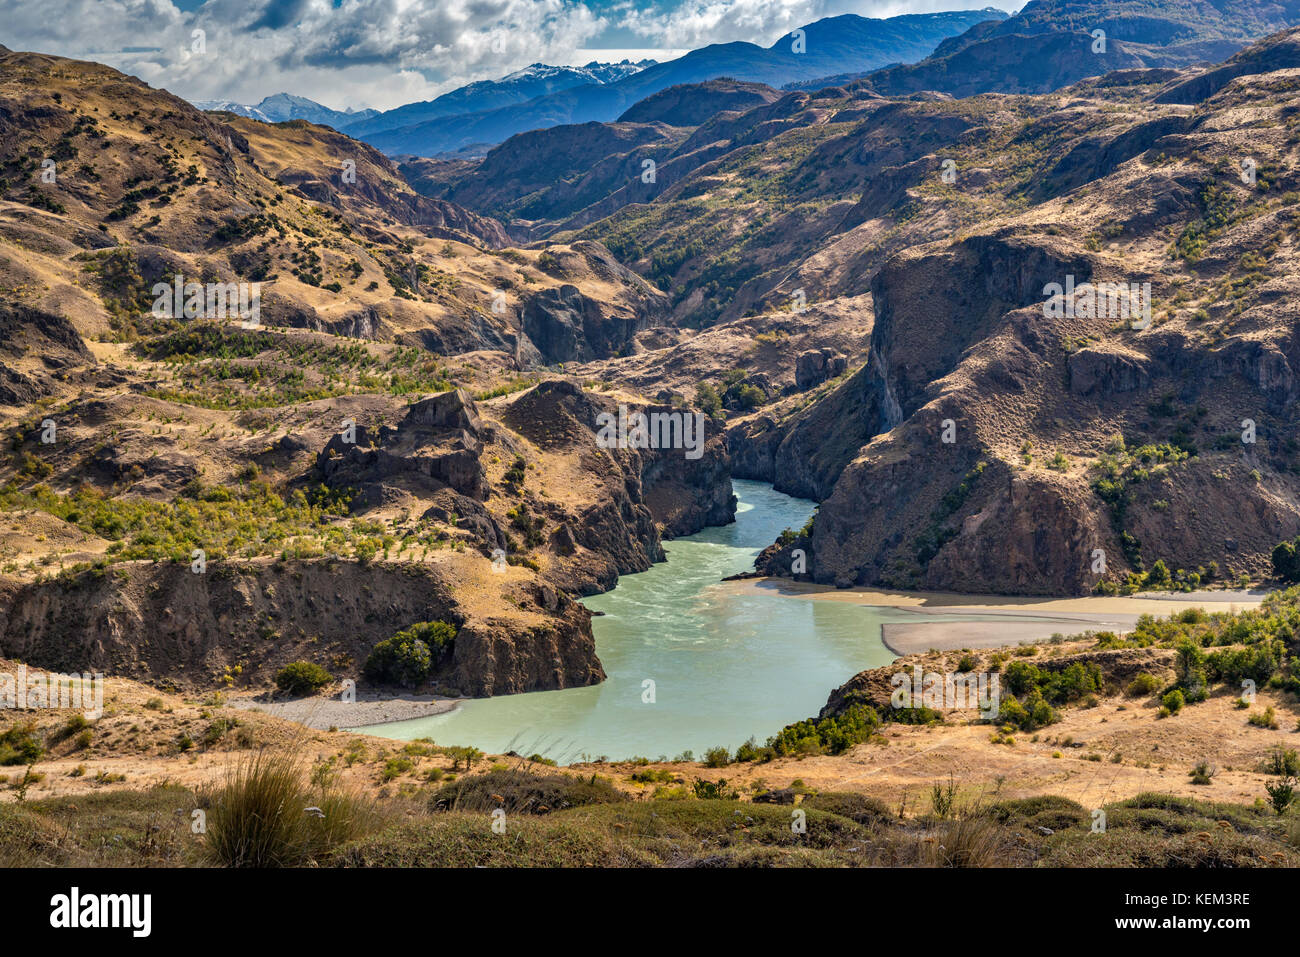 Rio Baker at confluence with Rio Chacabuco, view from Carretera Austral, Chacabuco Valley area, future Patagonia National Park, Chile Stock Photo